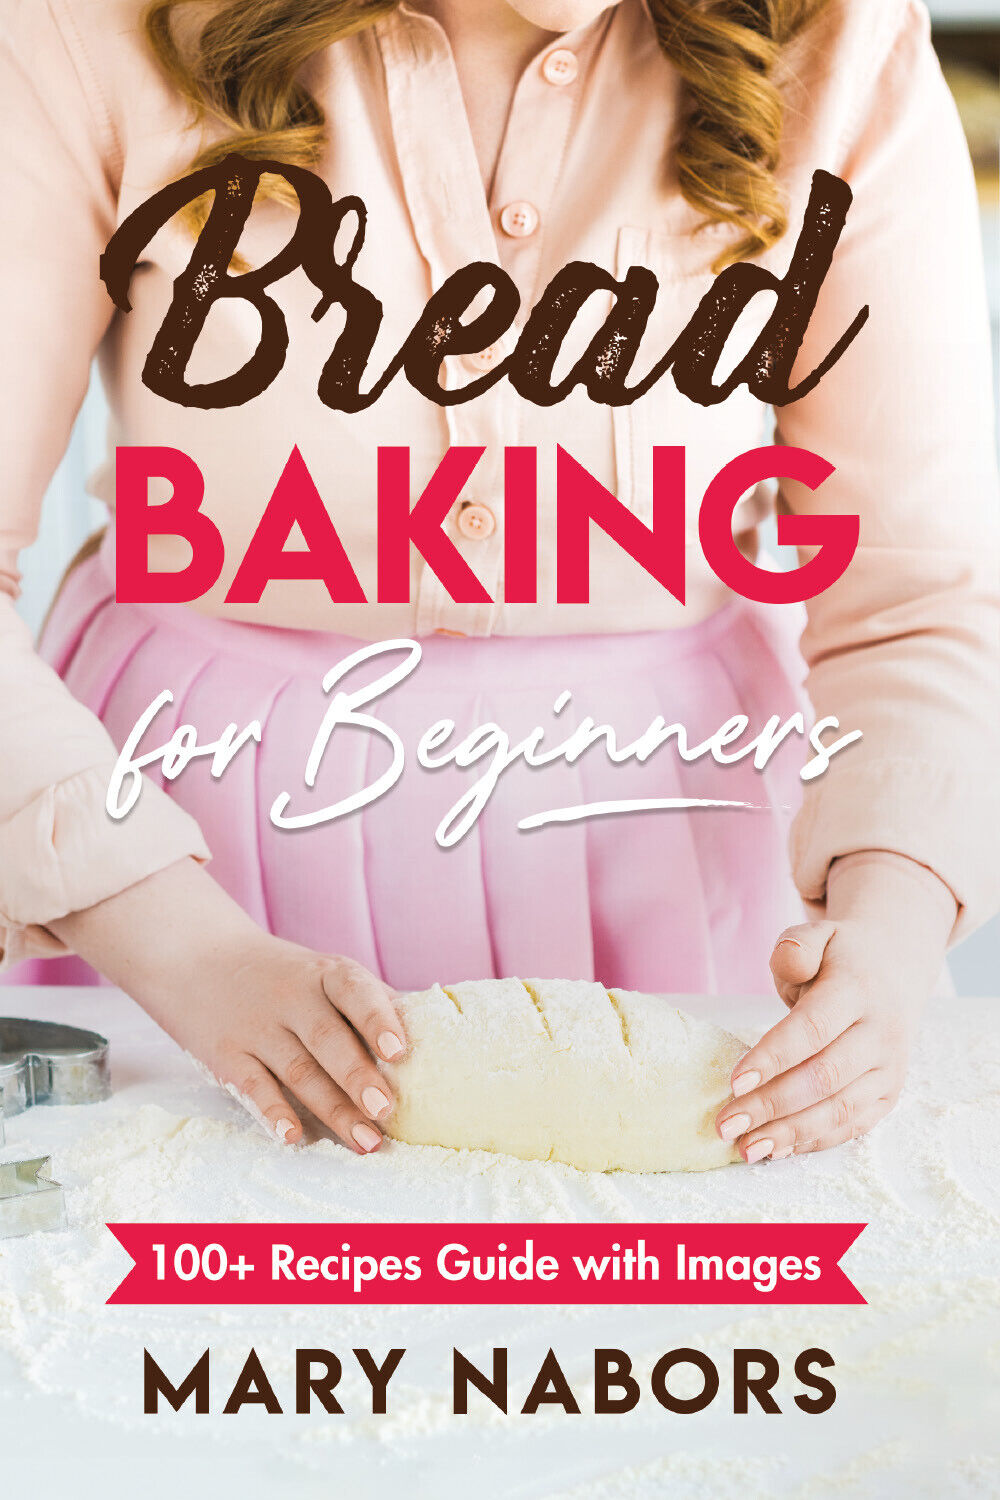 Bread Baking for Beginners. 100+ Recipes Guide with Images di Mary Nabors,  2021 libro usato